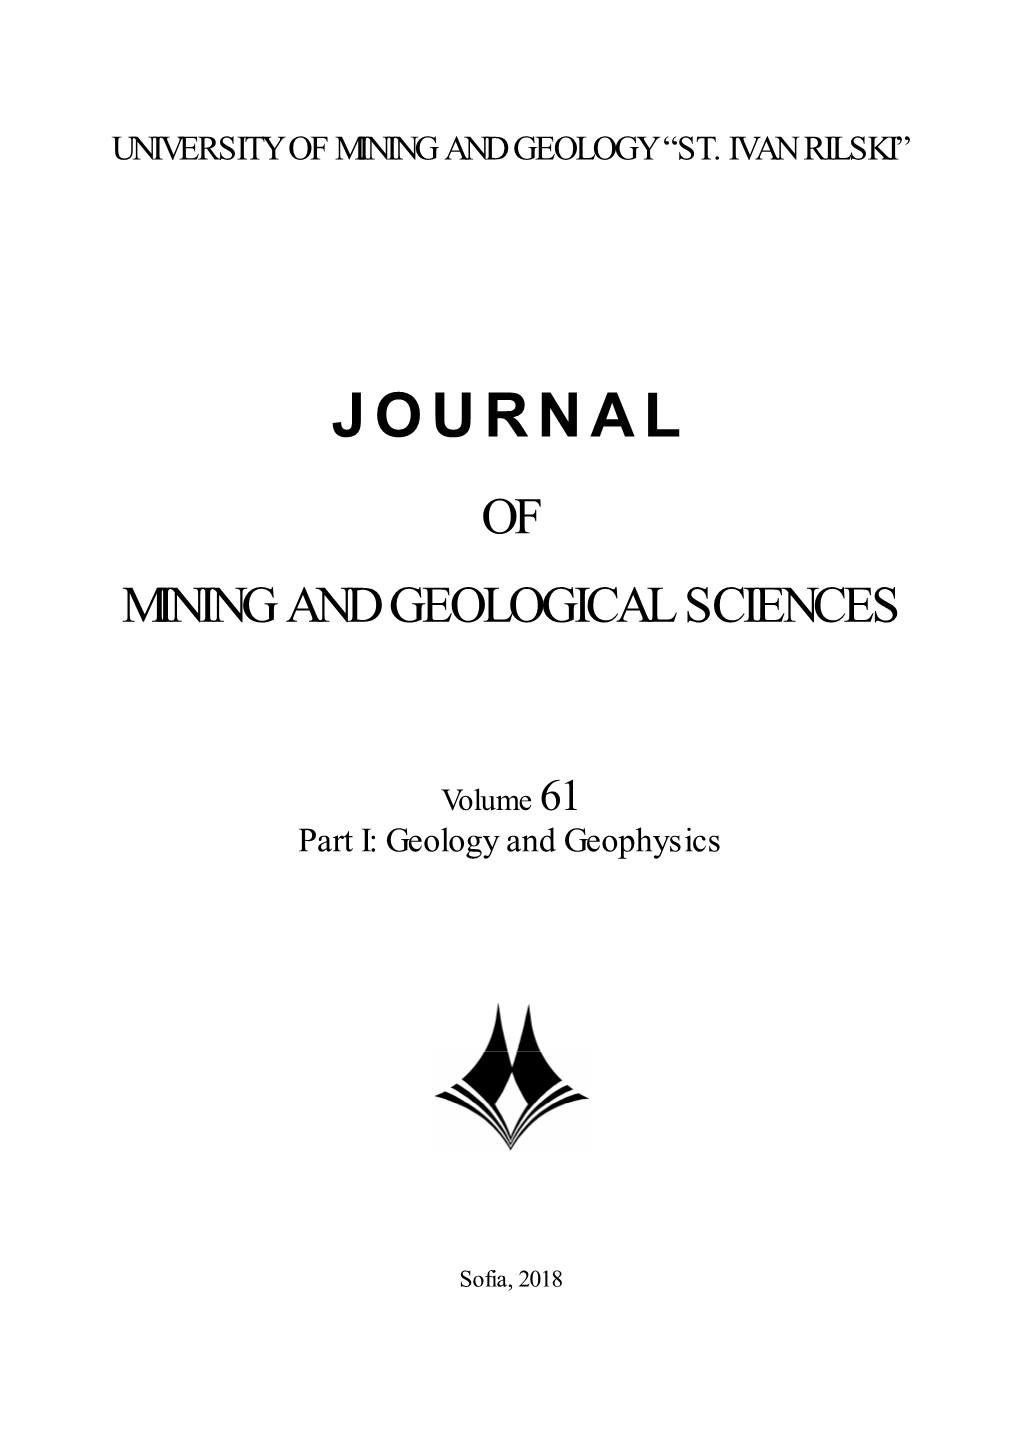 Journal of Mining and Geological Sciences